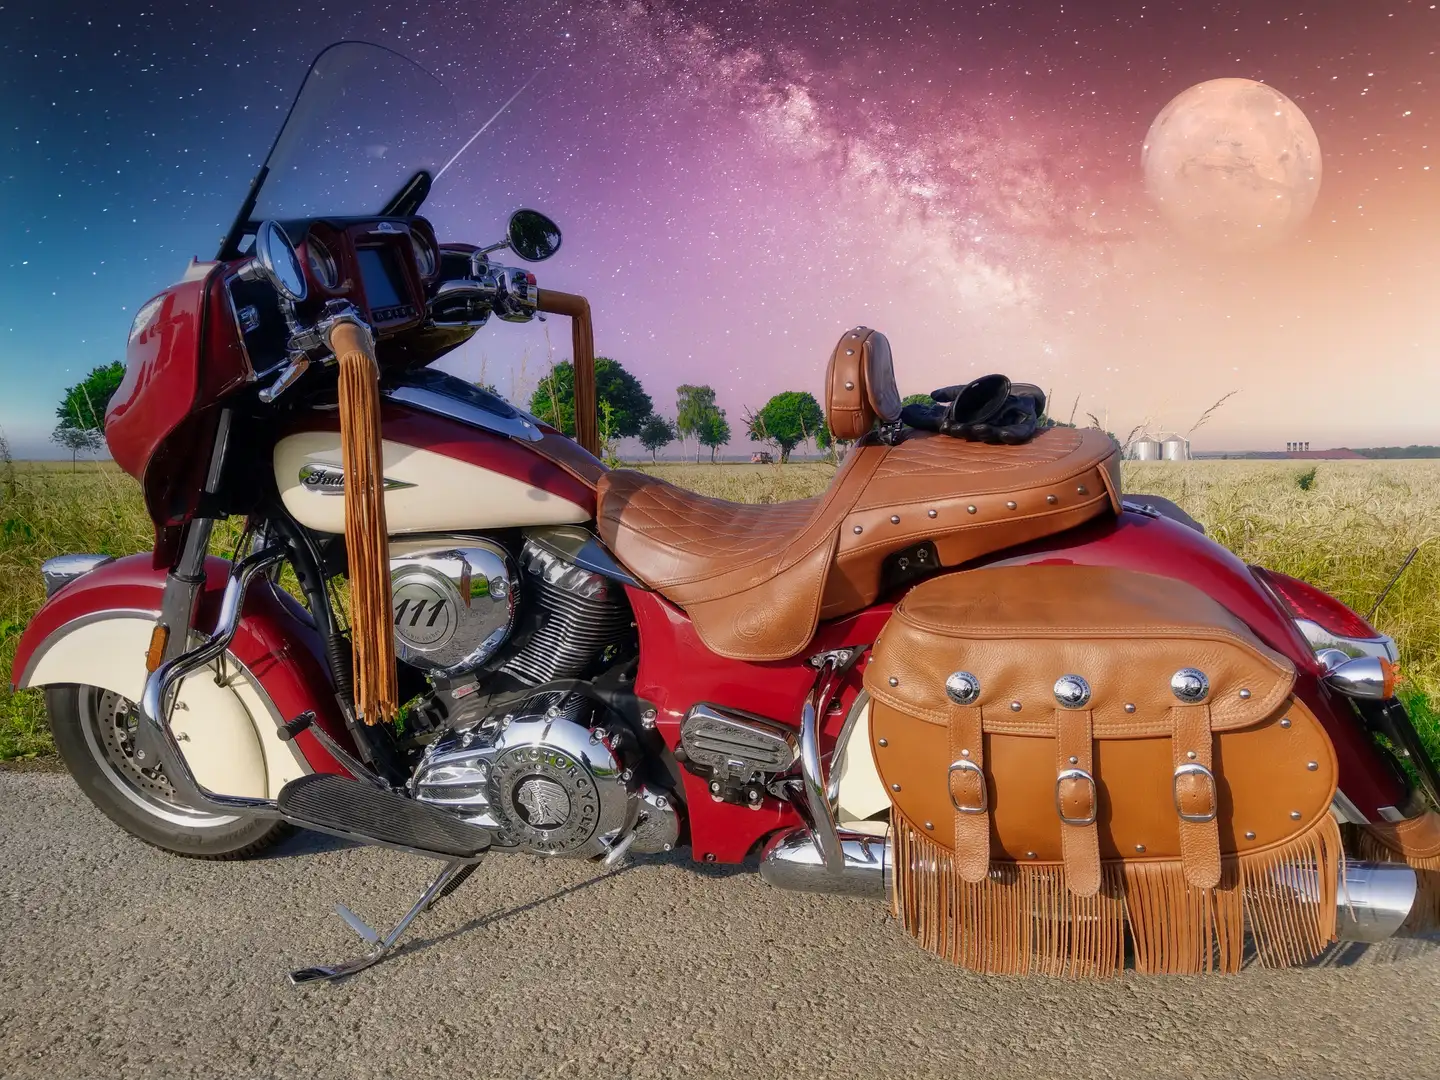 Indian Roadmaster Rosso - 1